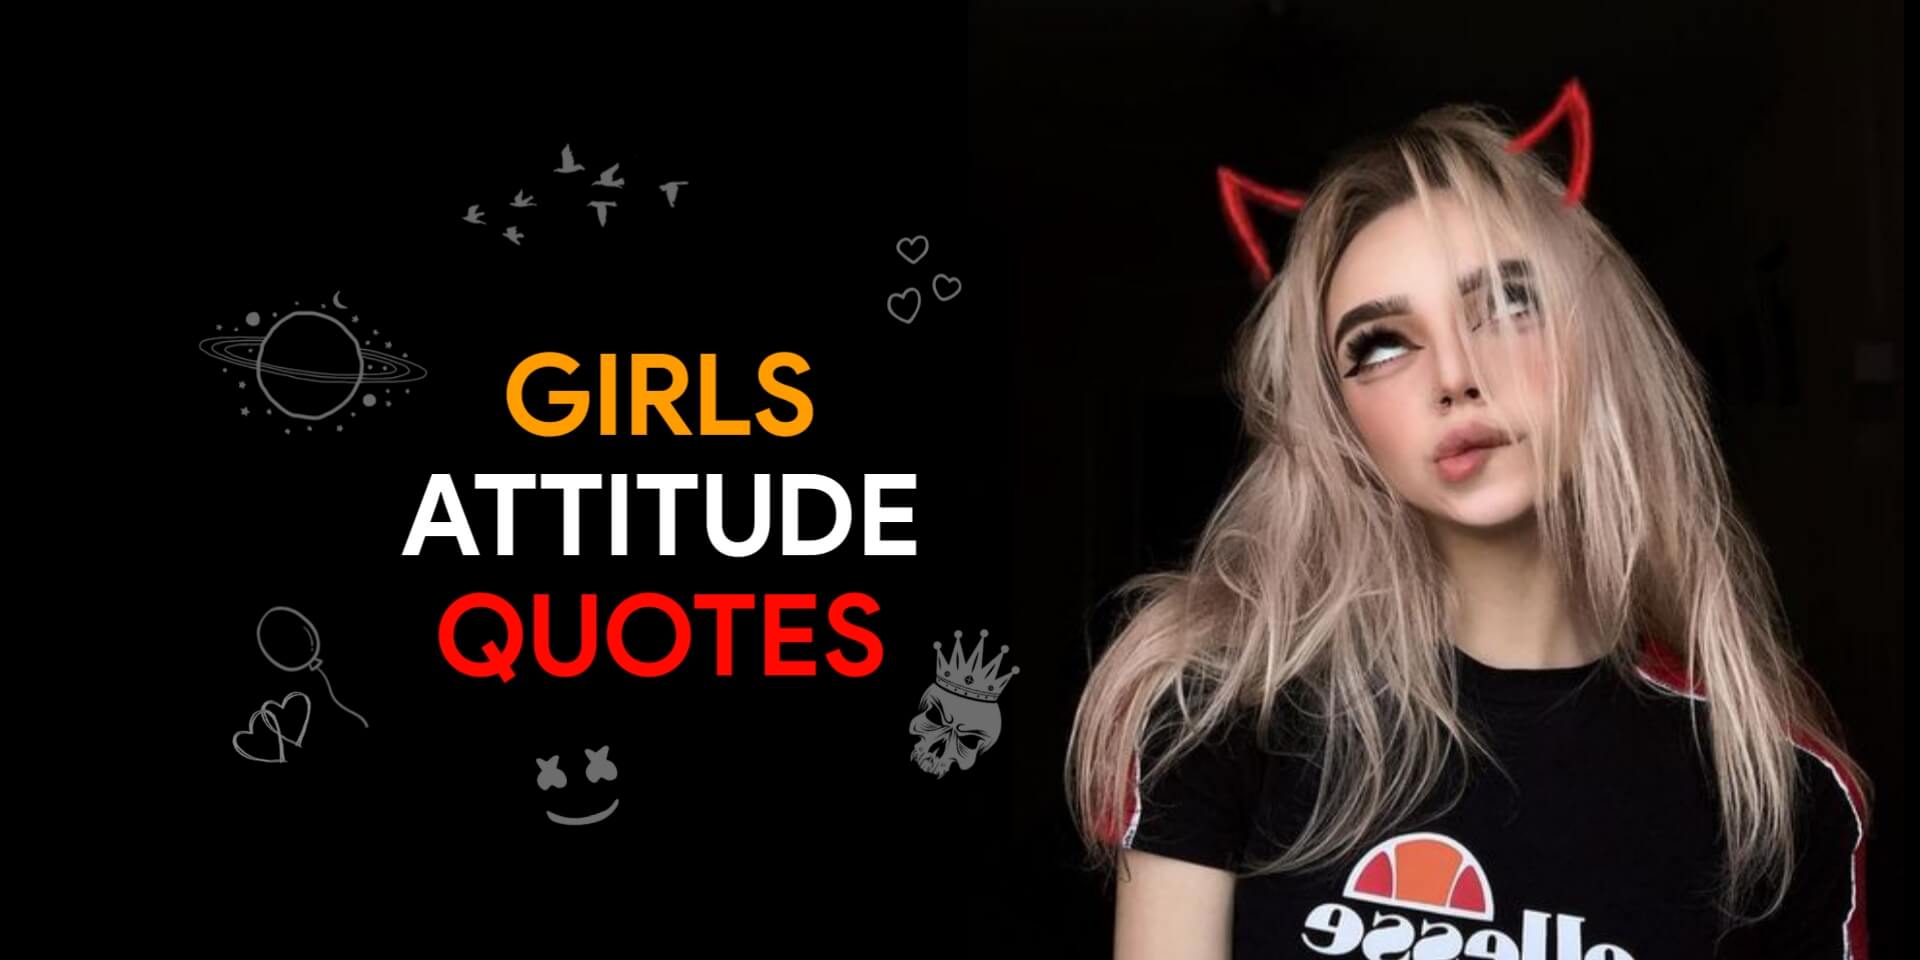 Attitude Quotes For Girls